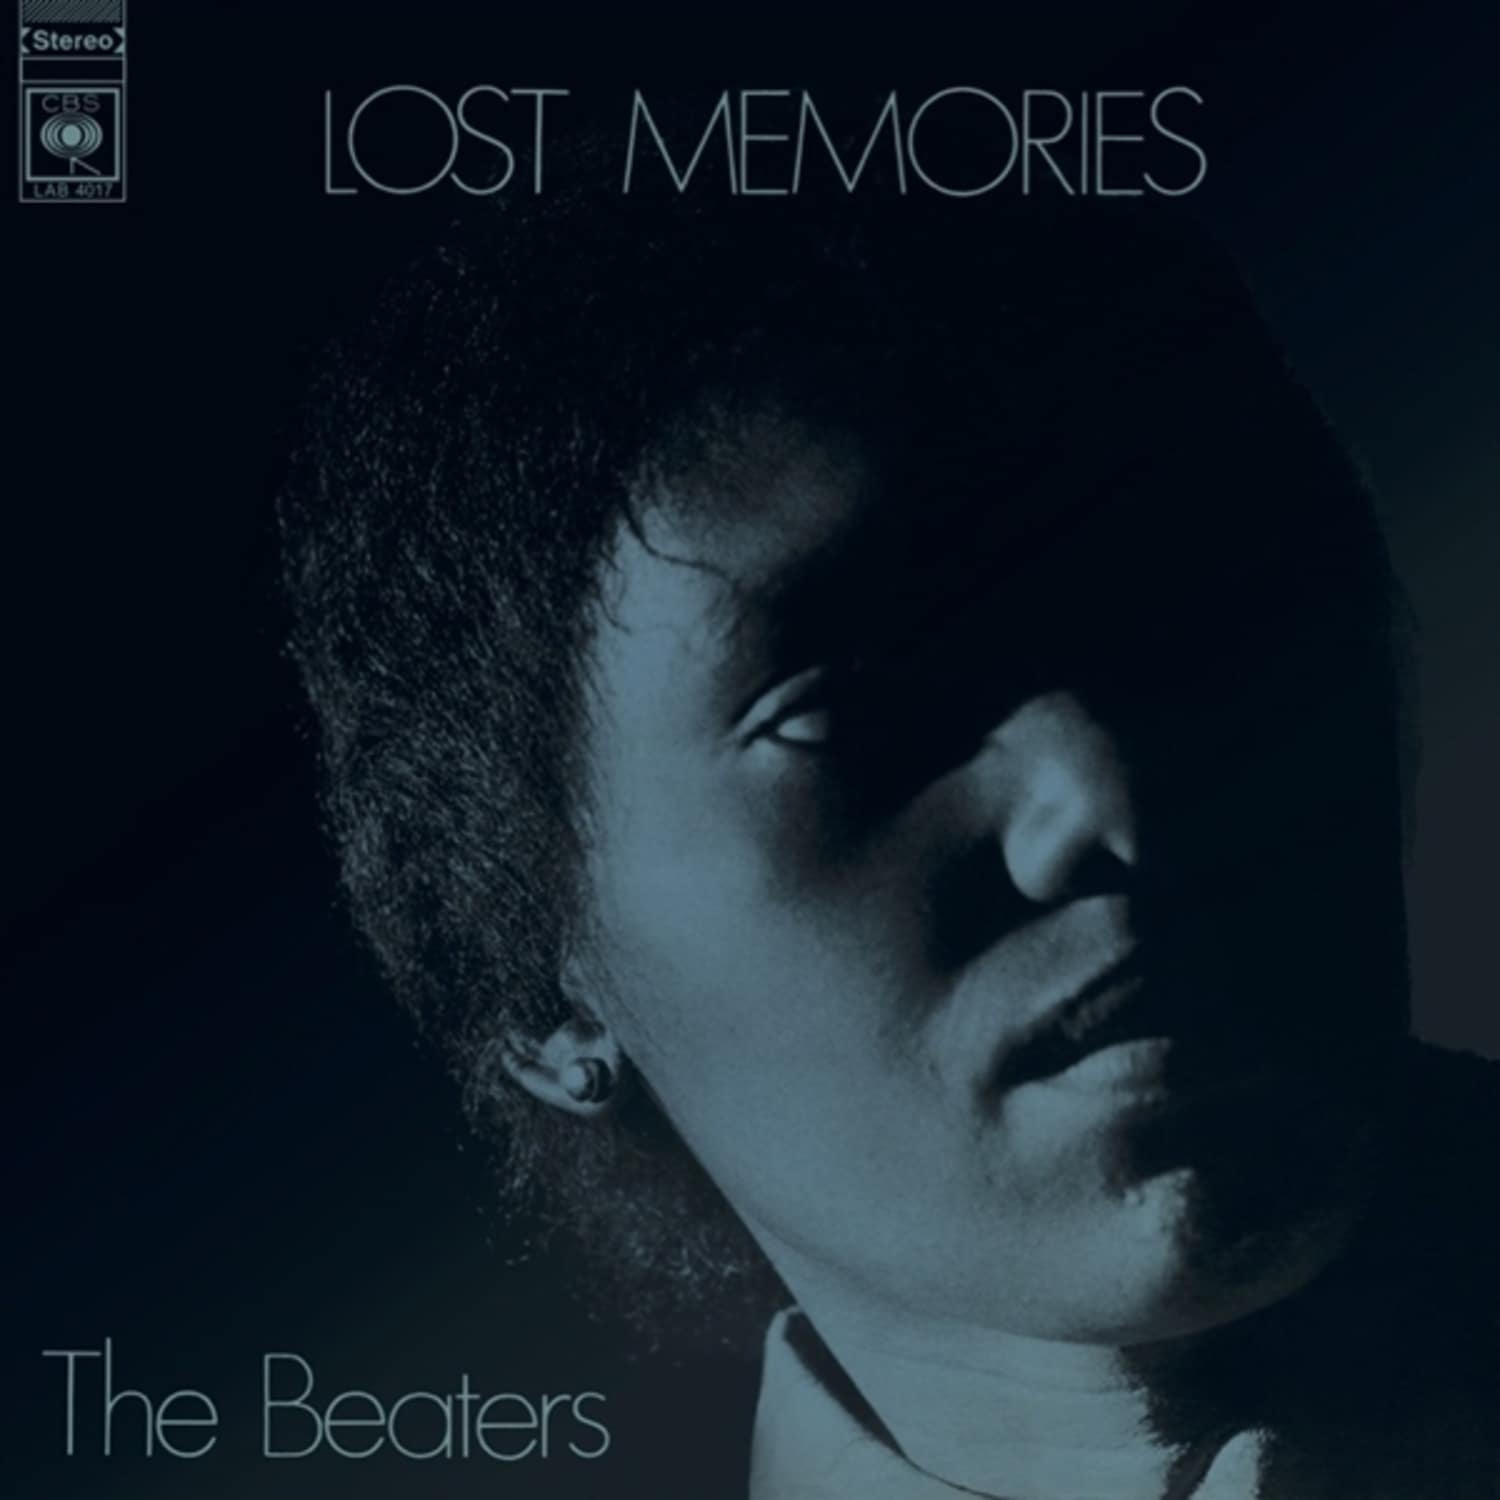 The Beaters - LOST MEMORIES 